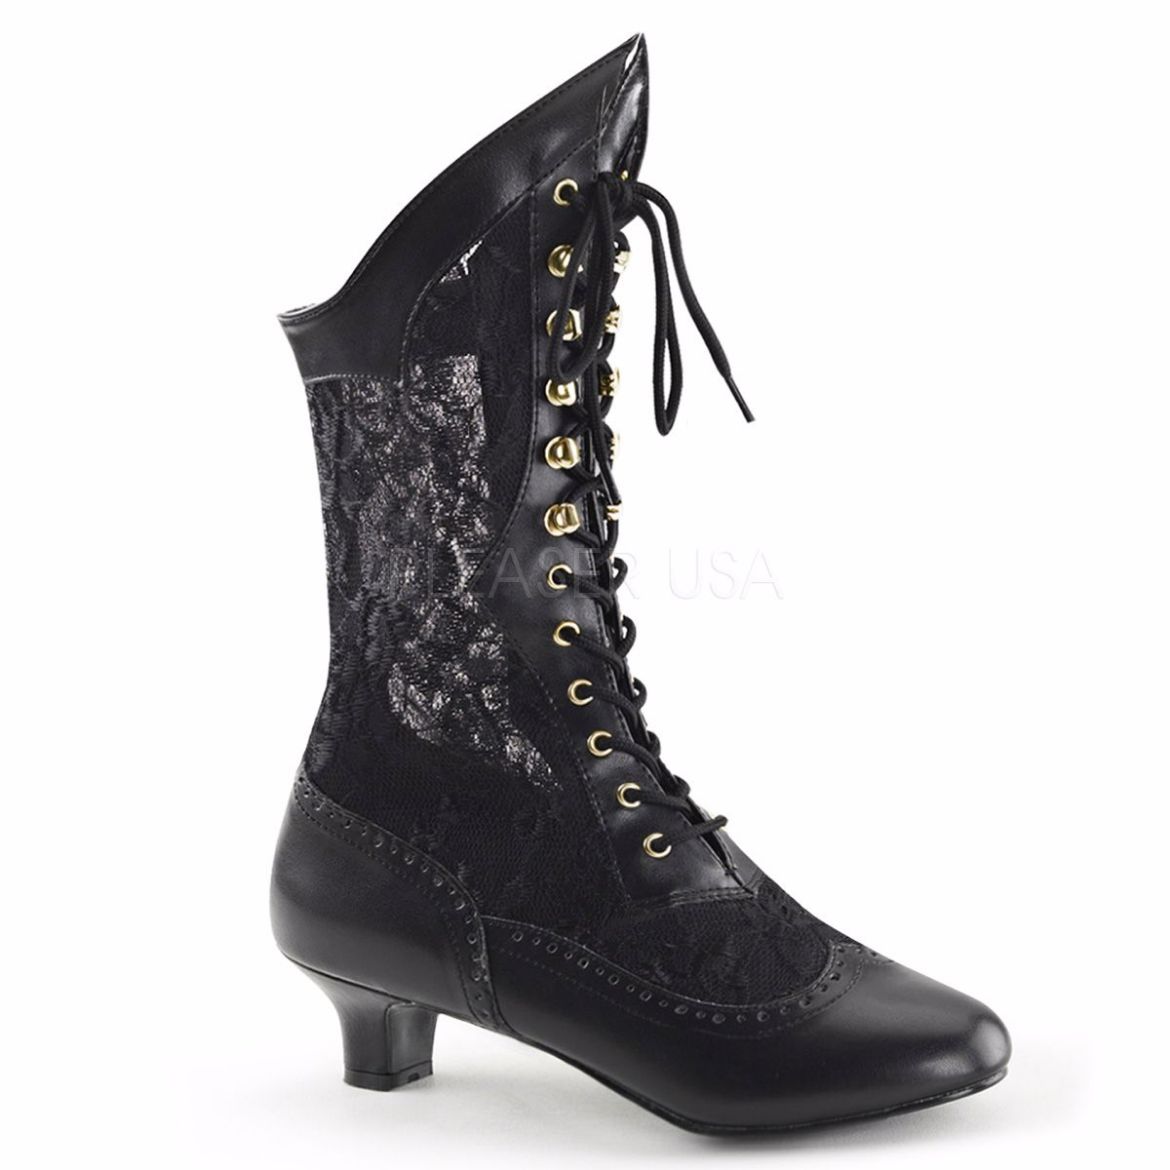 Product image of Funtasma Dame-115 Black Pu-Lace, 2 inch (5.1 cm) Heel Ankle Boot